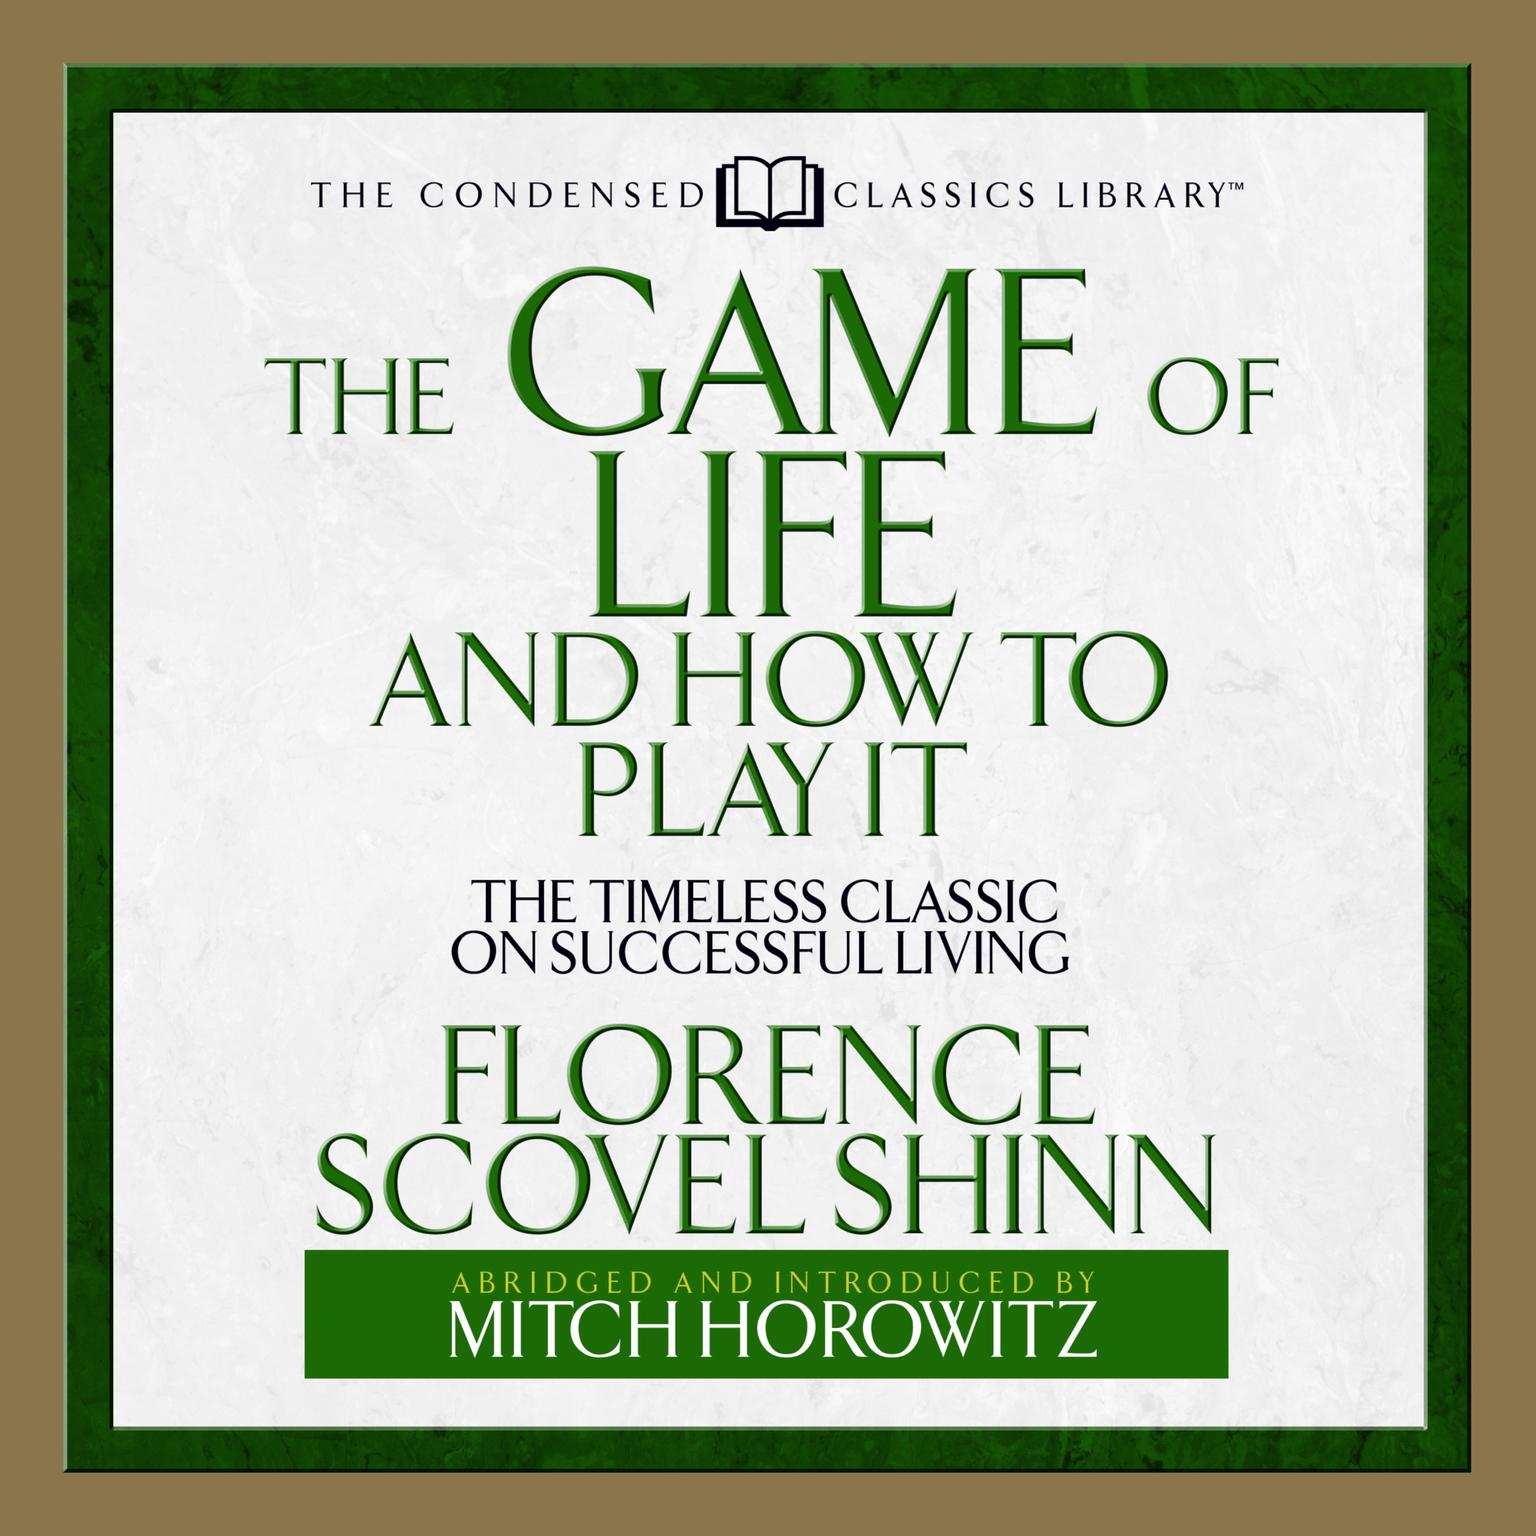 The Game of Life and How to Play It (Abridged): The Timeless Classic on Successful Living  (Abridged) Audiobook, by Florence Scovel Shinn